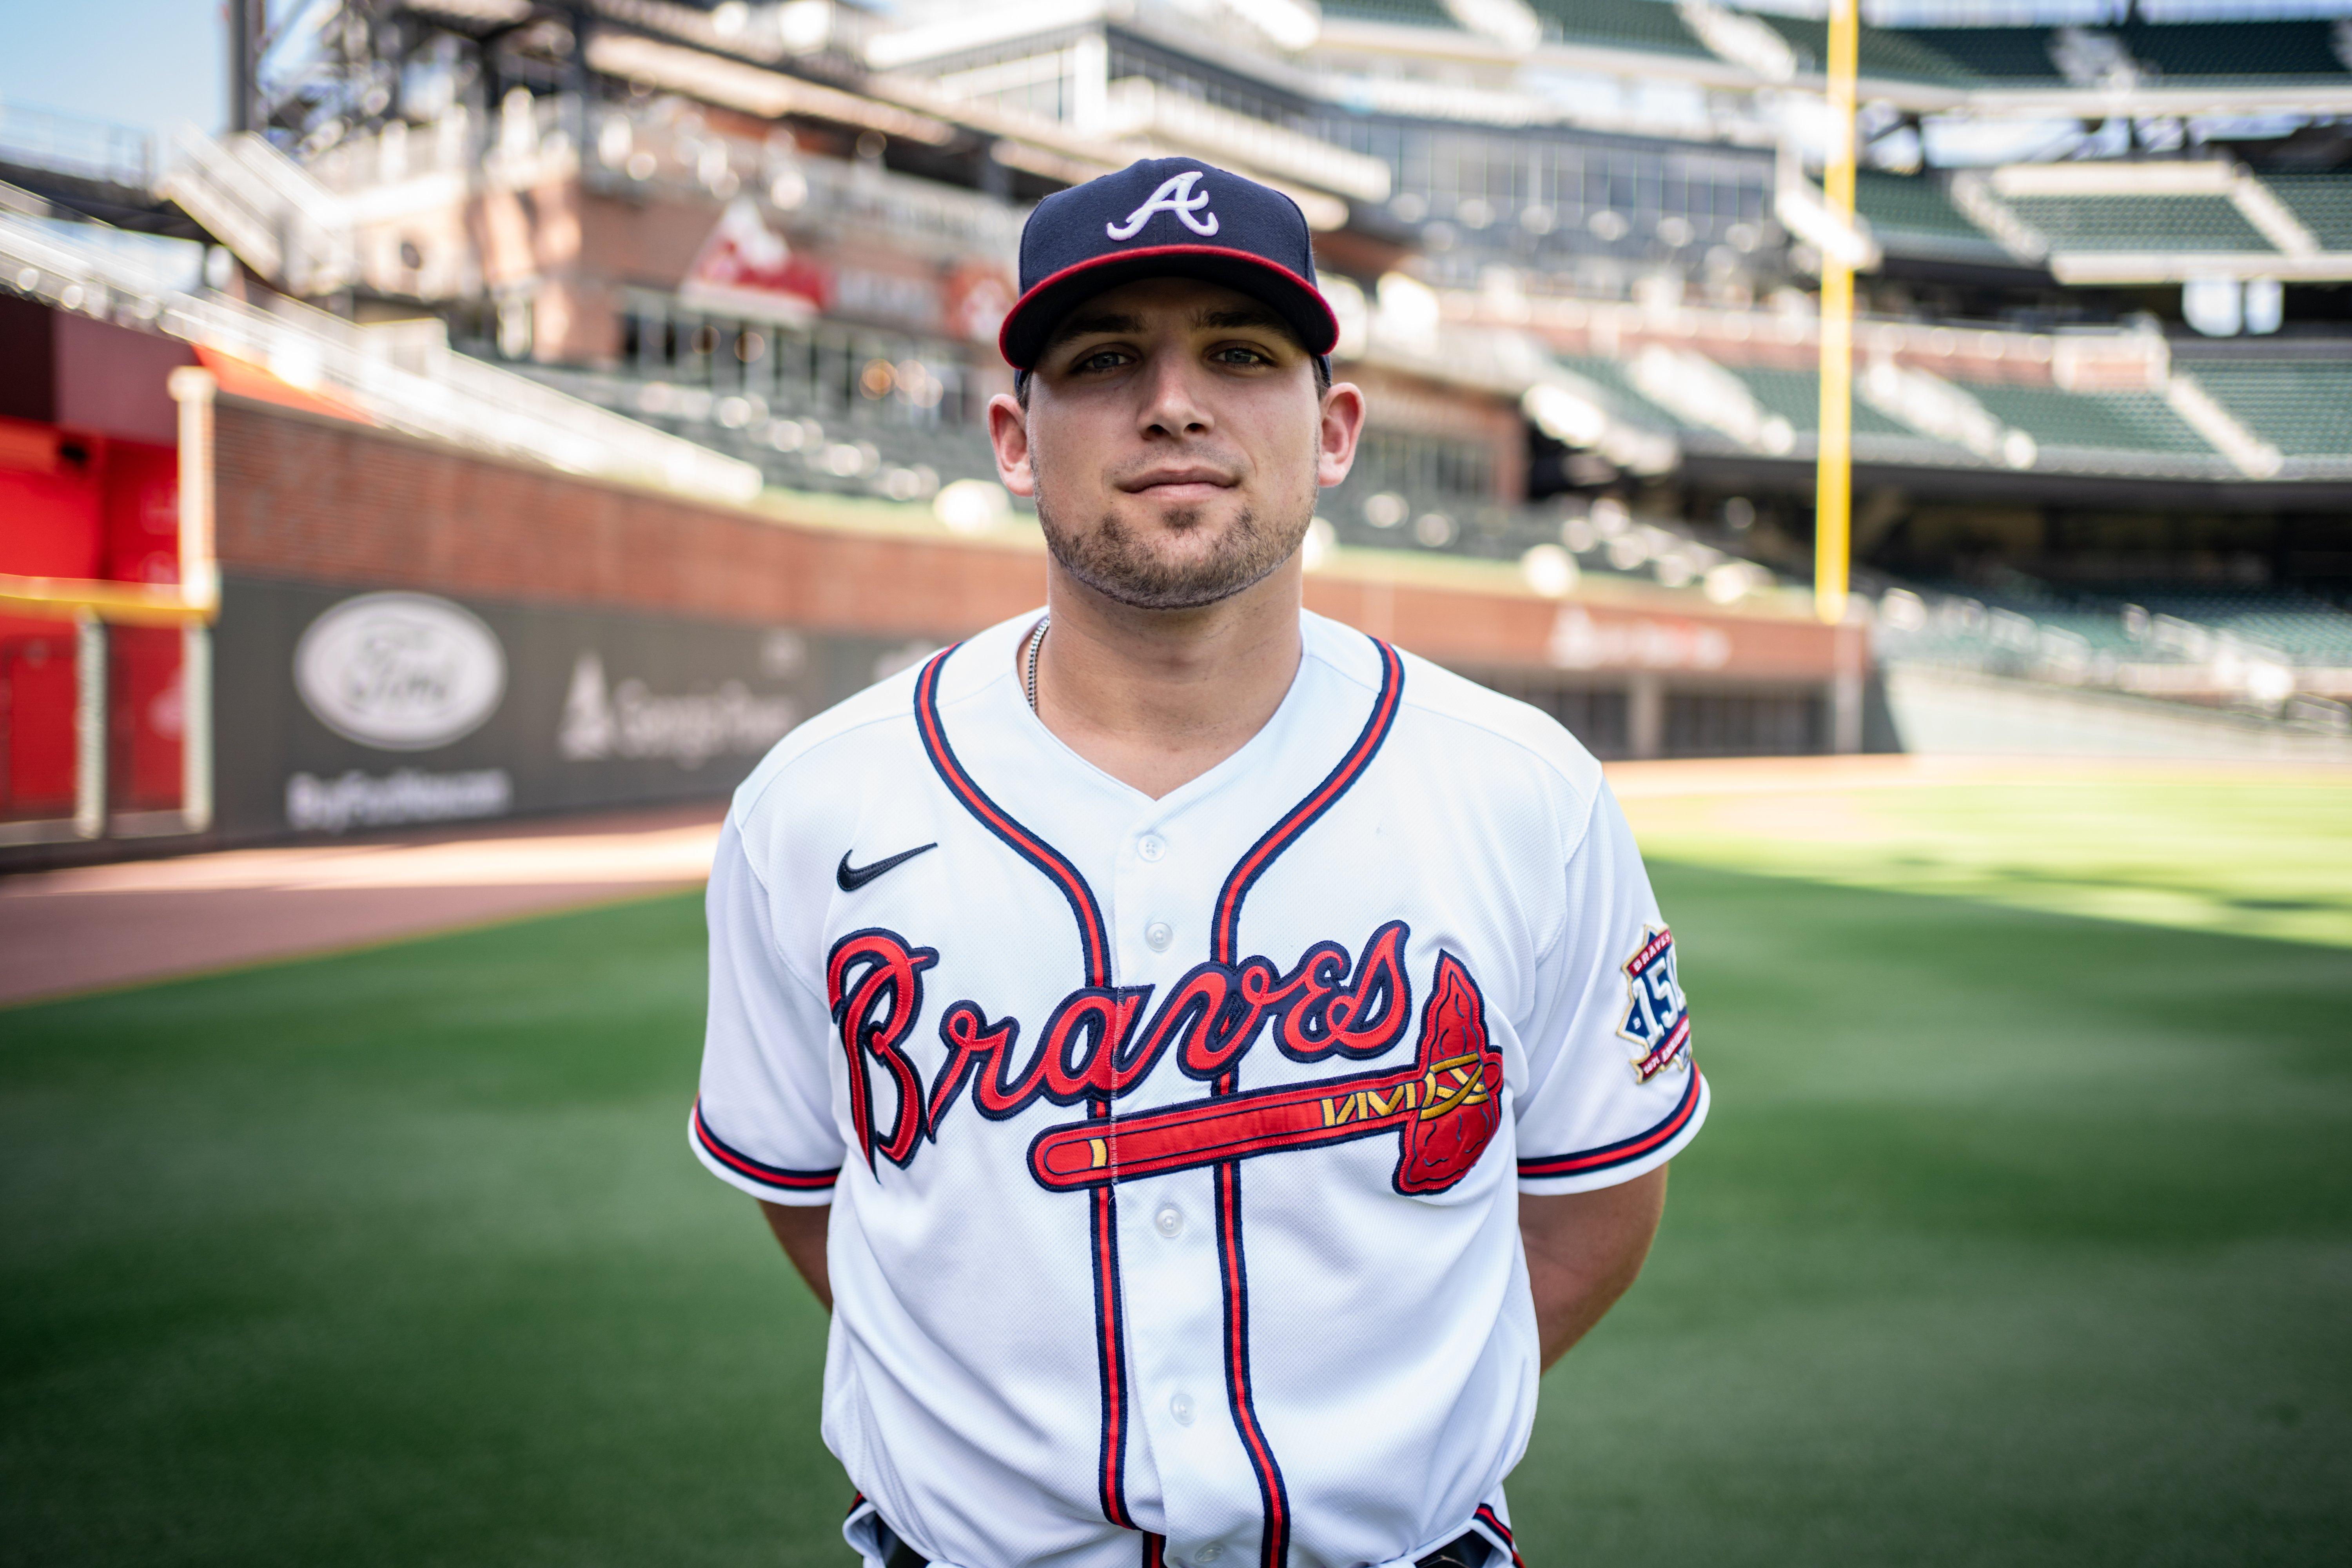 Riley was drafted by the Braves in the first round of the 2015 MLB Draft. 